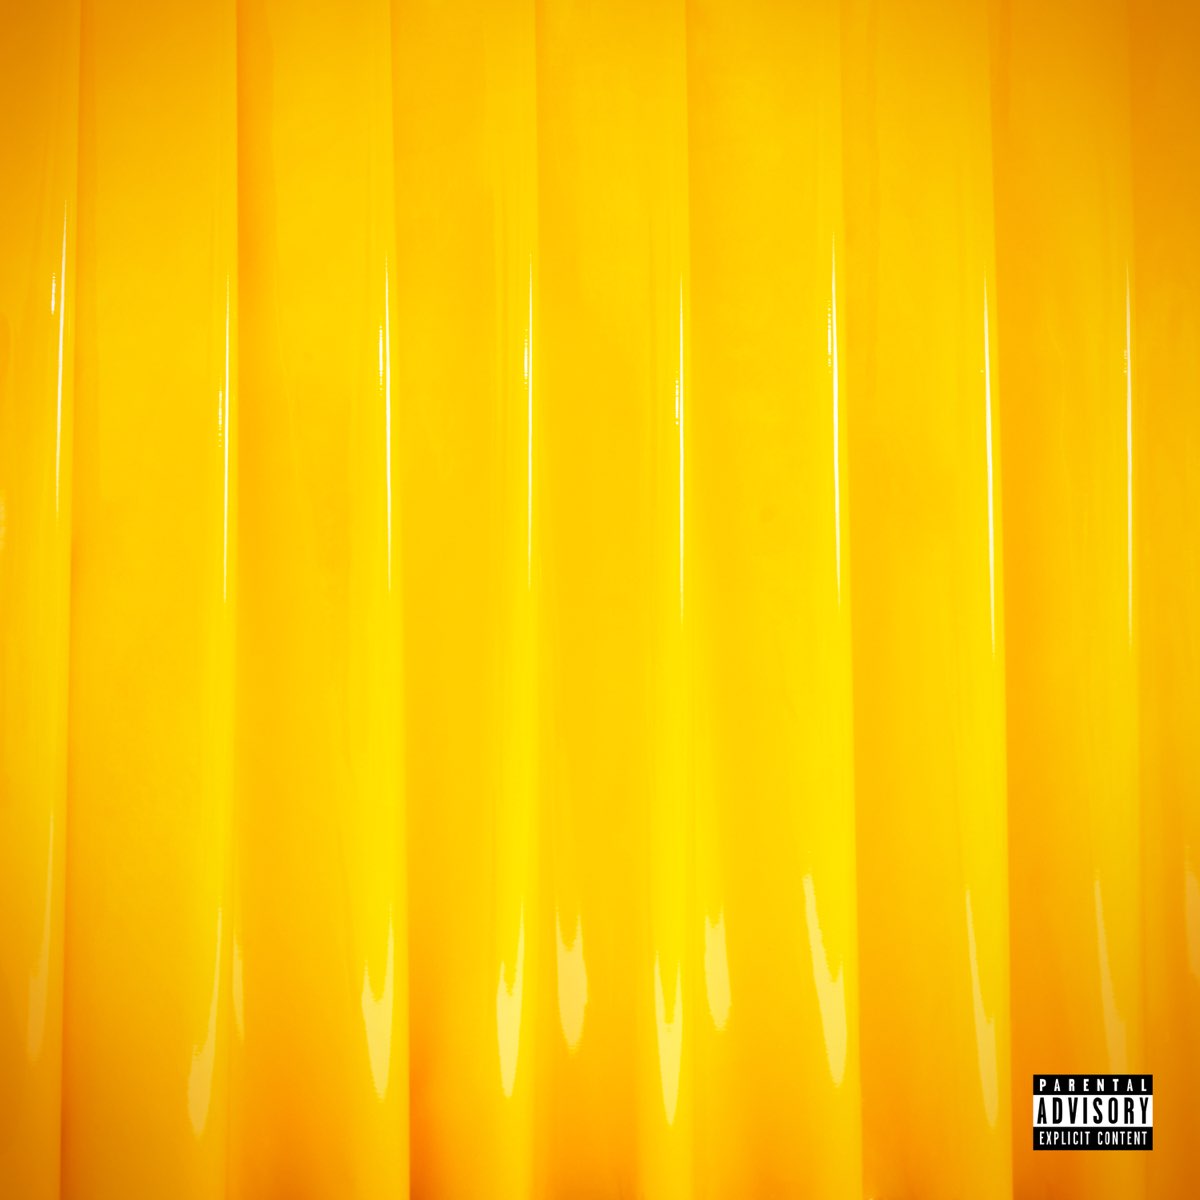 All+Is+Yellow+is+the+first+studio+album+by+Cole+Bennett%2C+best+known+for+his+work+on+Lyrical+Lemonade.+It+was+released+on+Jan.+26.